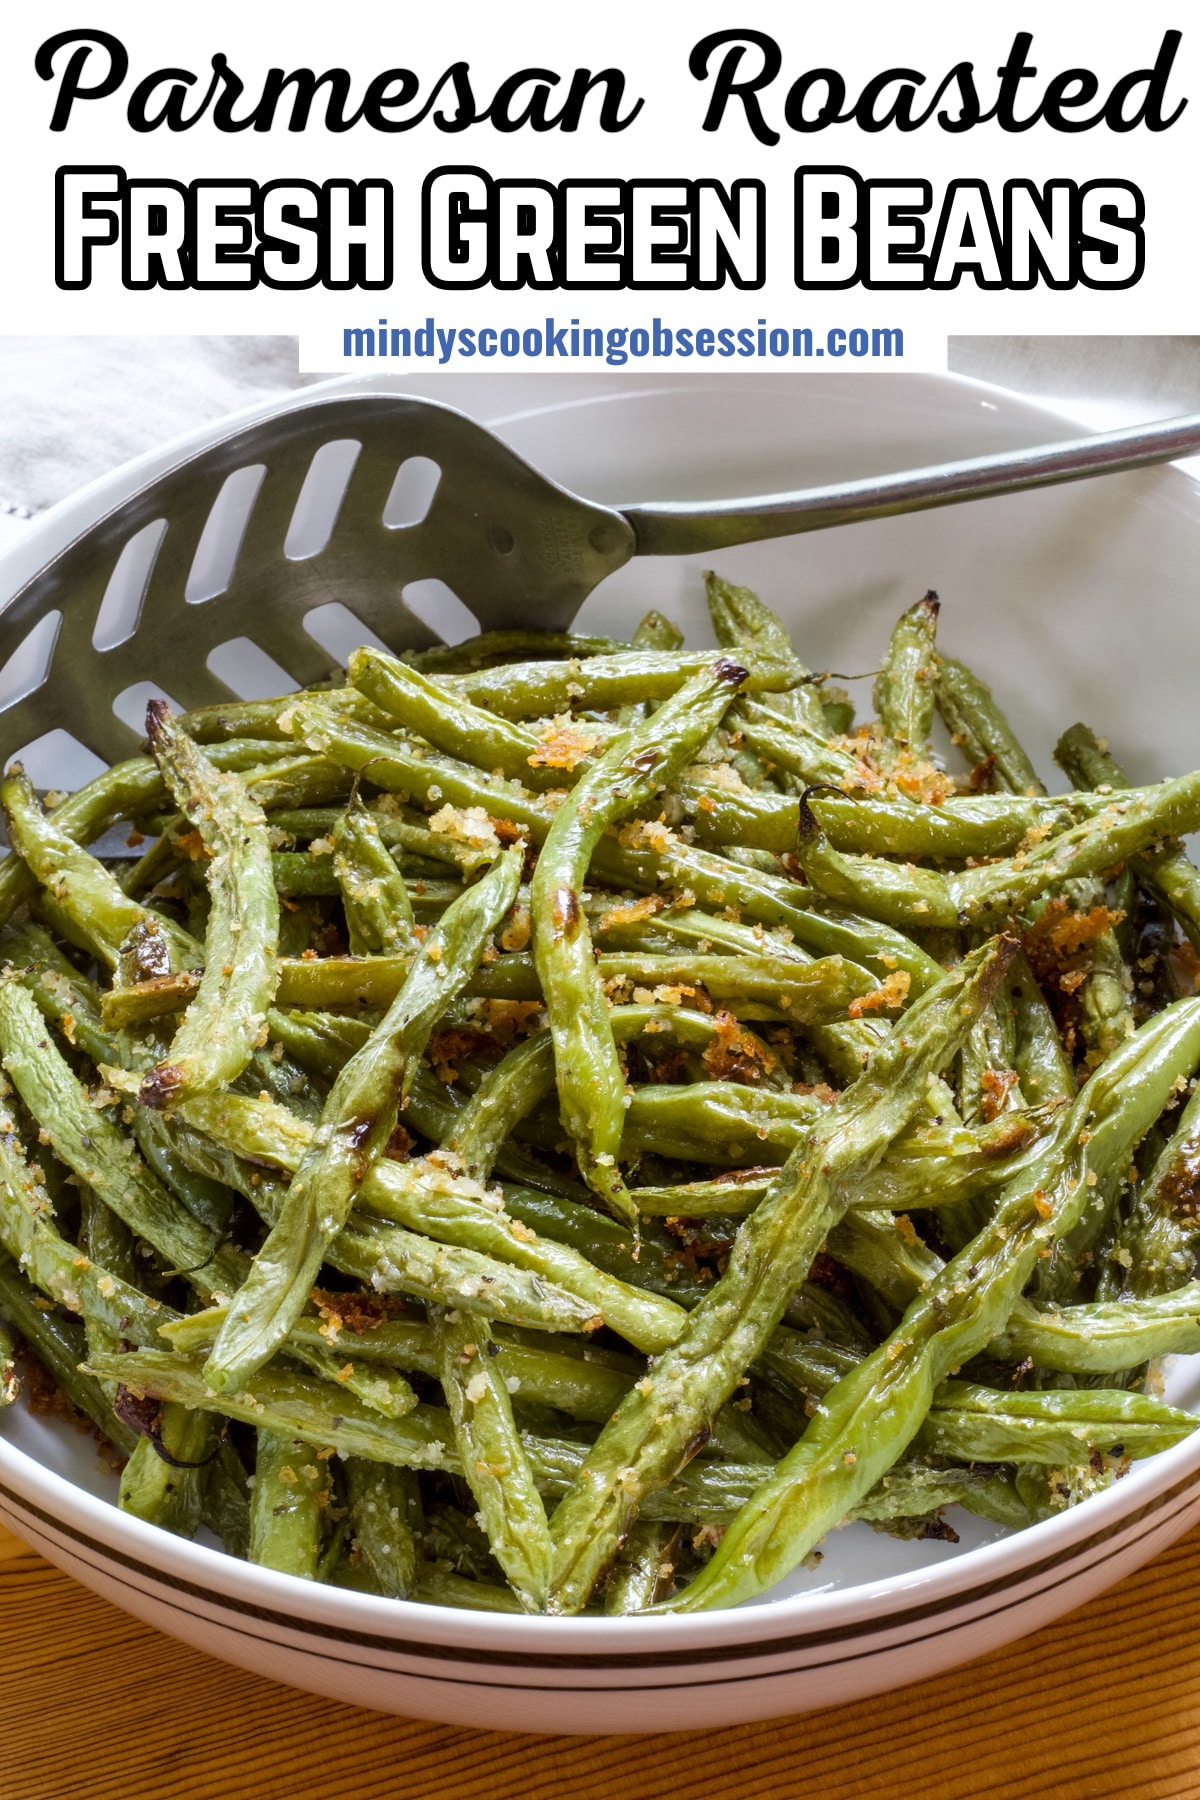 Easy Parmesan Roasted Green Beans are coated with a mixture of olive oil, bread crumbs, cheese, Italian seasoning, salt, and pepper. Simple and delicious! via @mindyscookingobsession